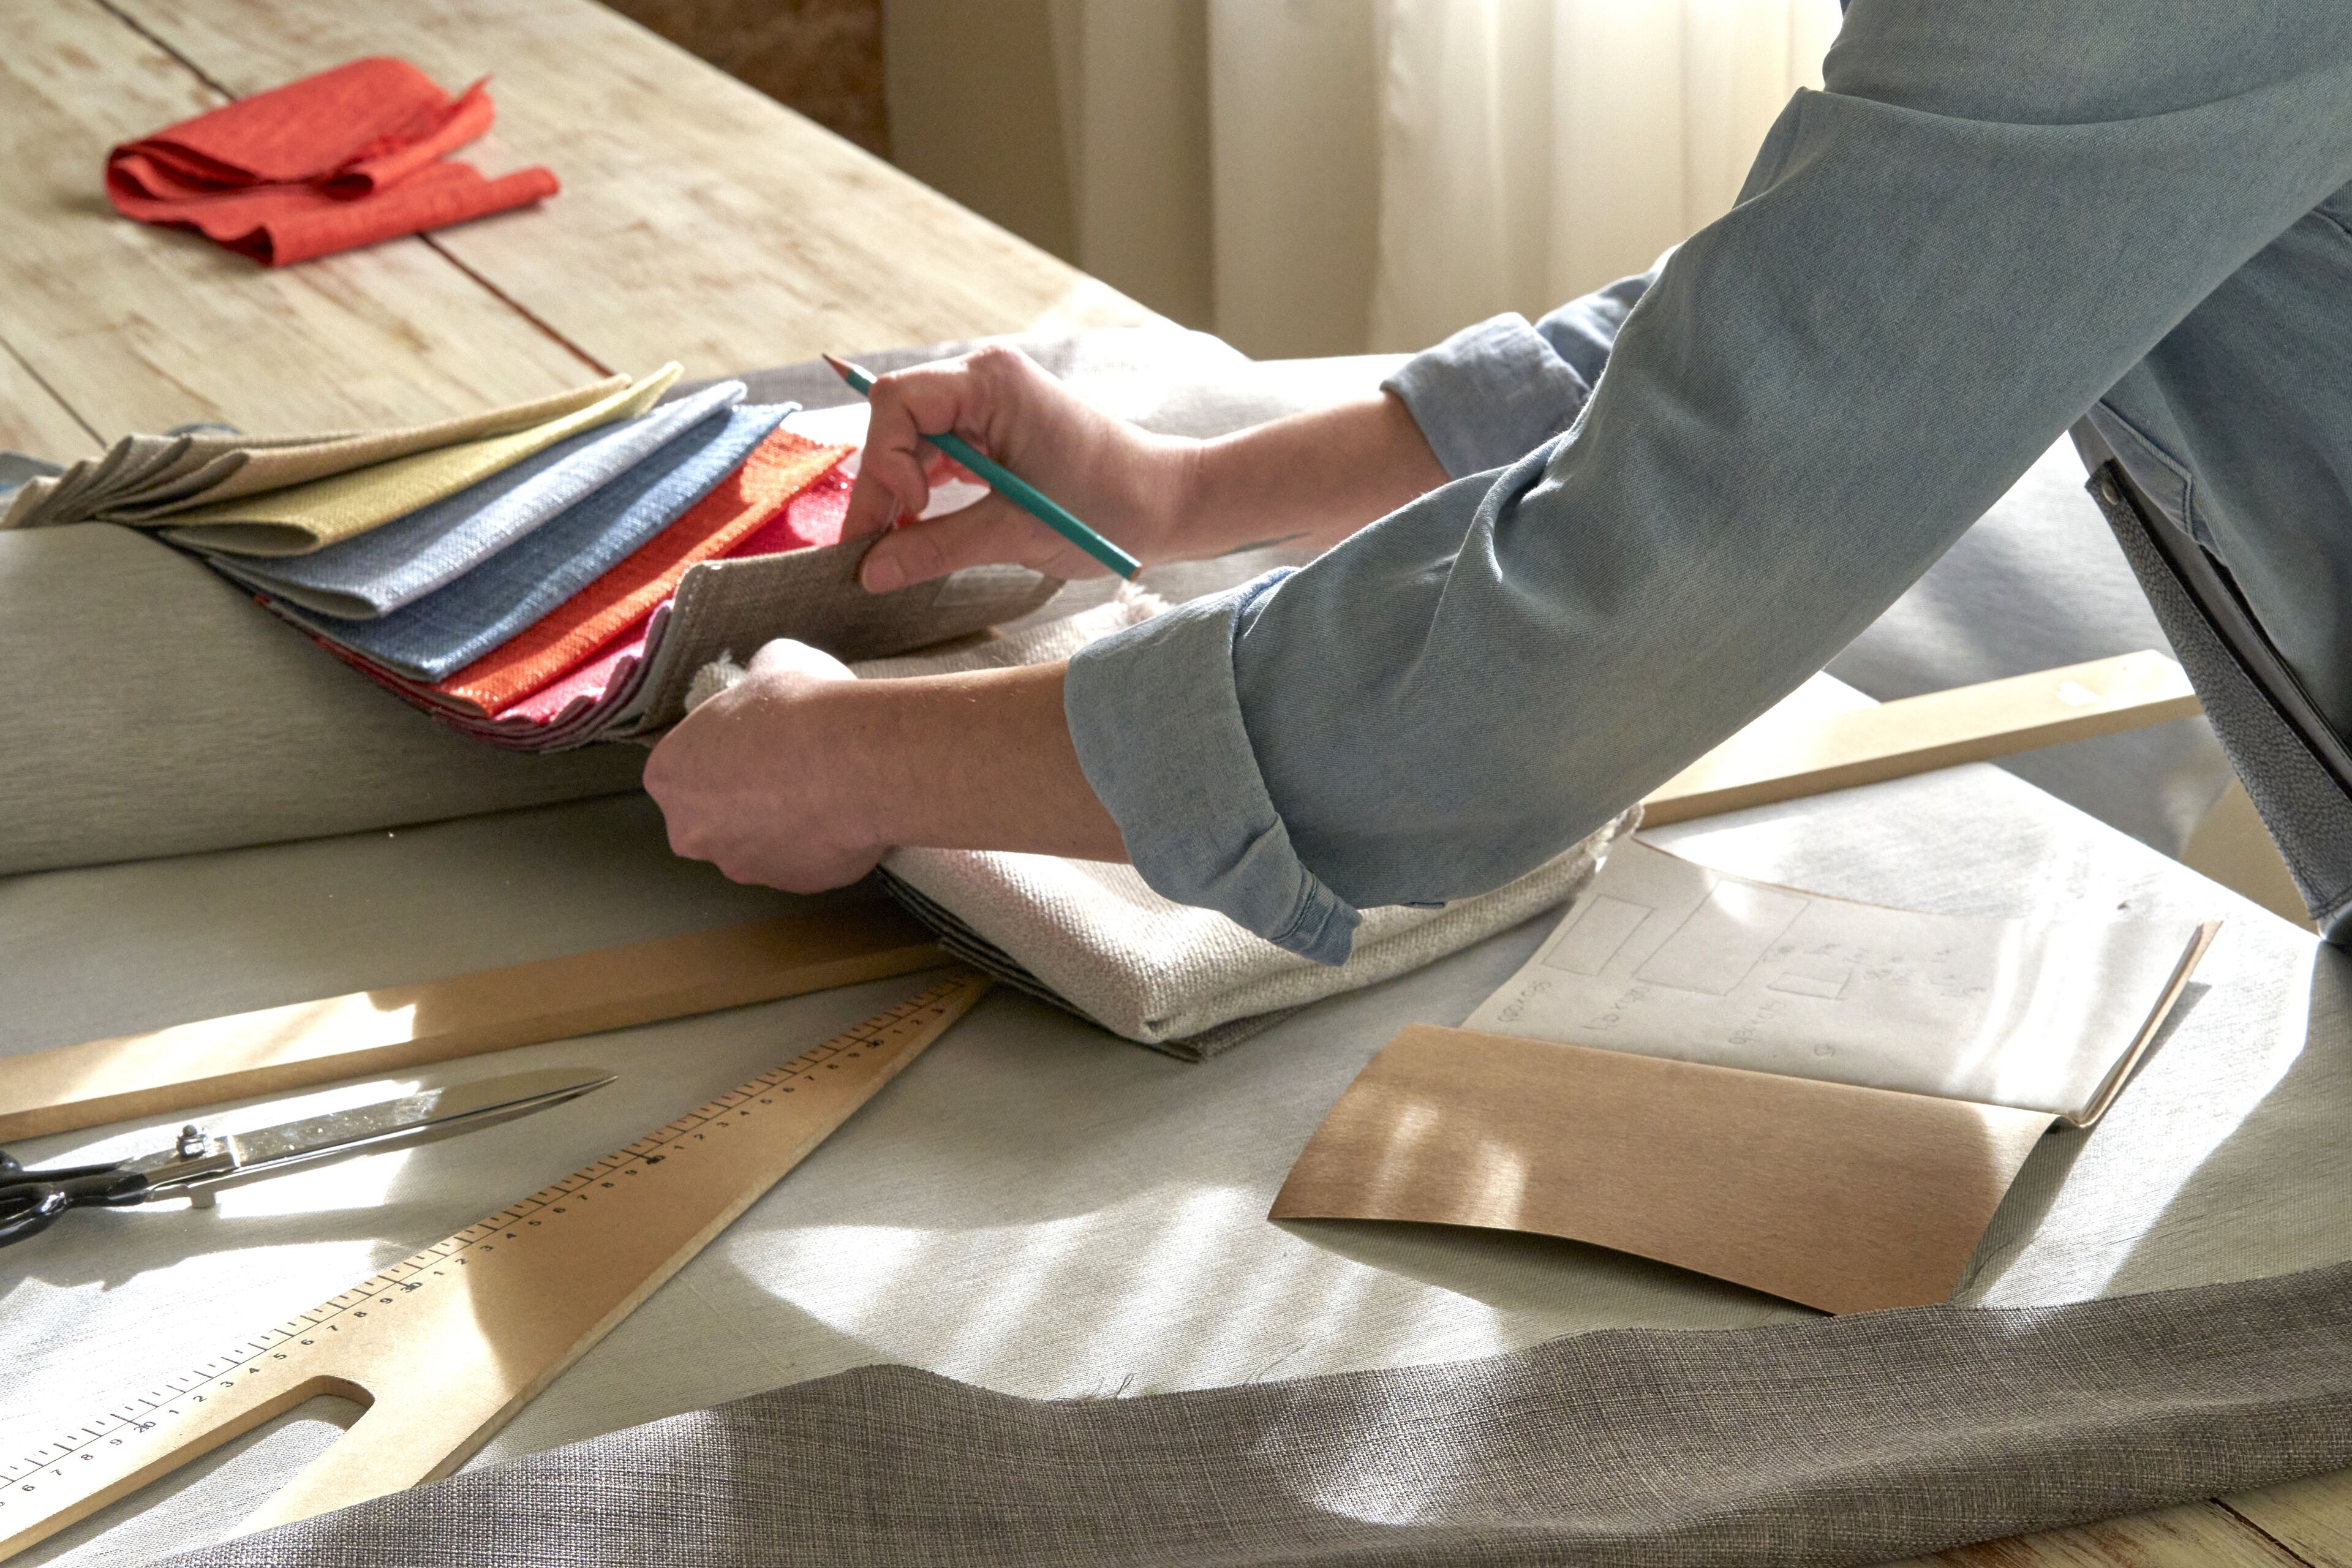 A person meticulously chooses fabric swatches for tailoring, with measuring tools and patterns laid out on a wooden table, in a well-lit workspace.